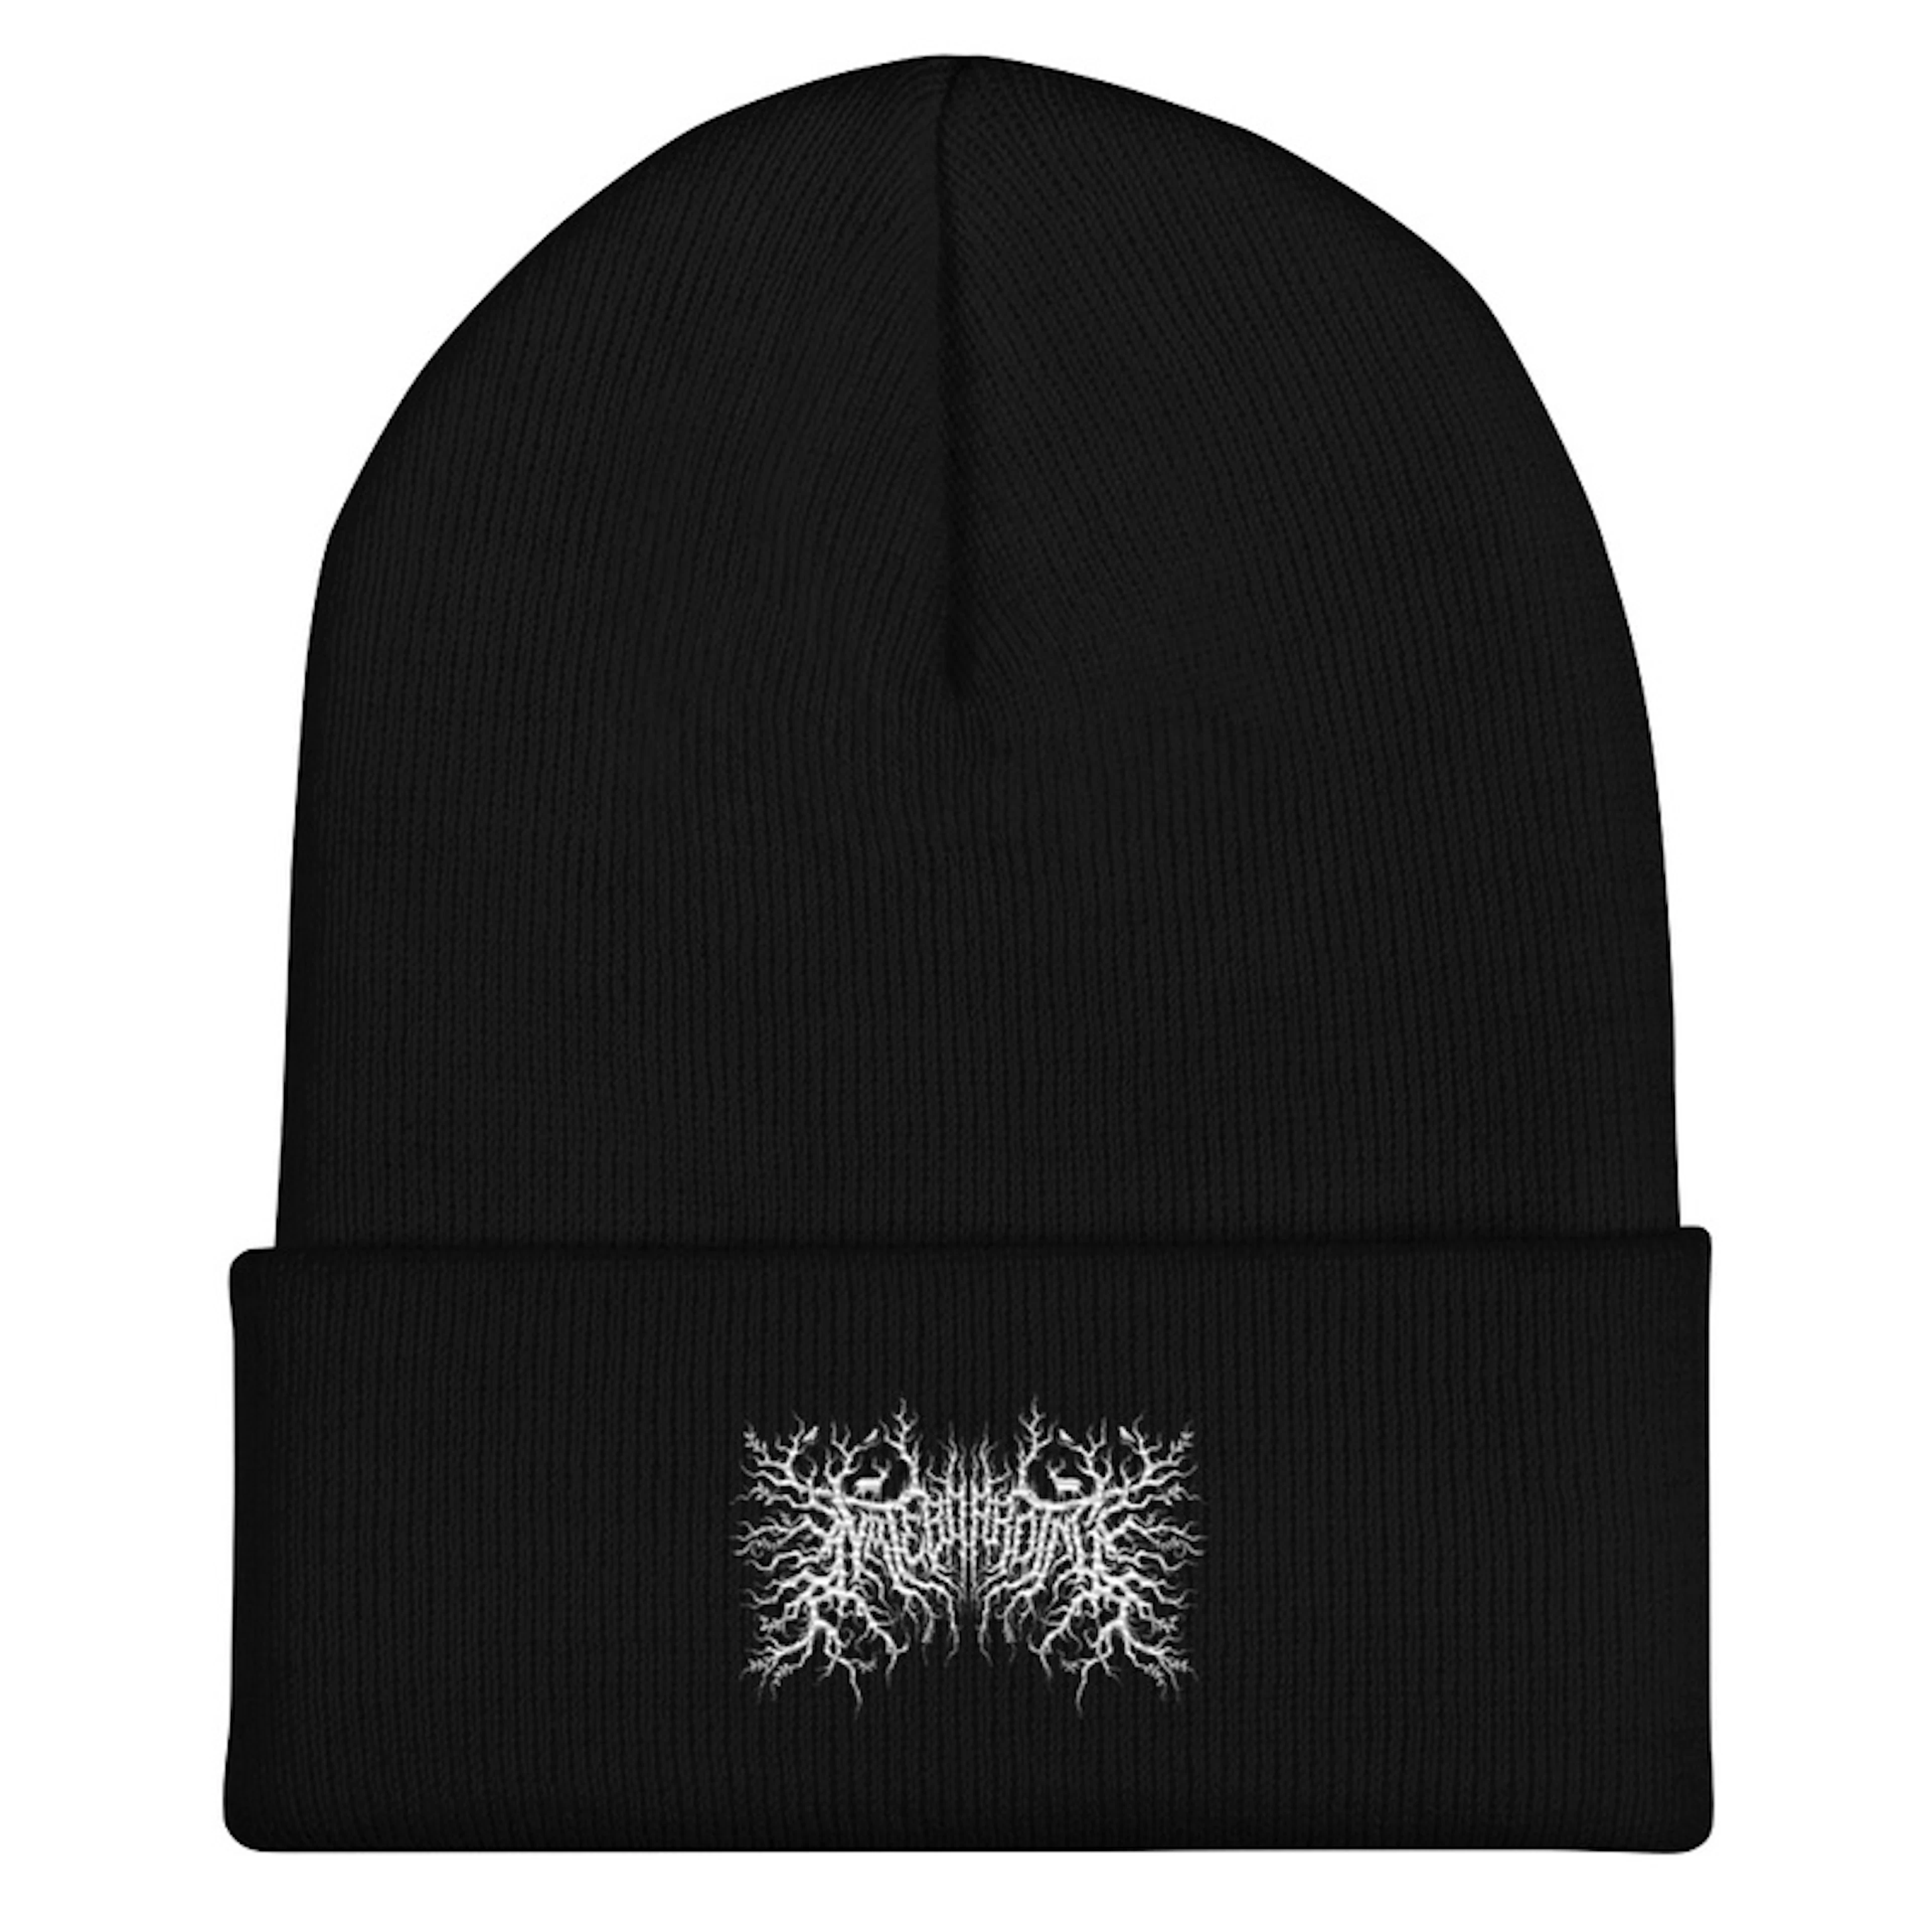 Nateboarding Metal Embroidered Beanie